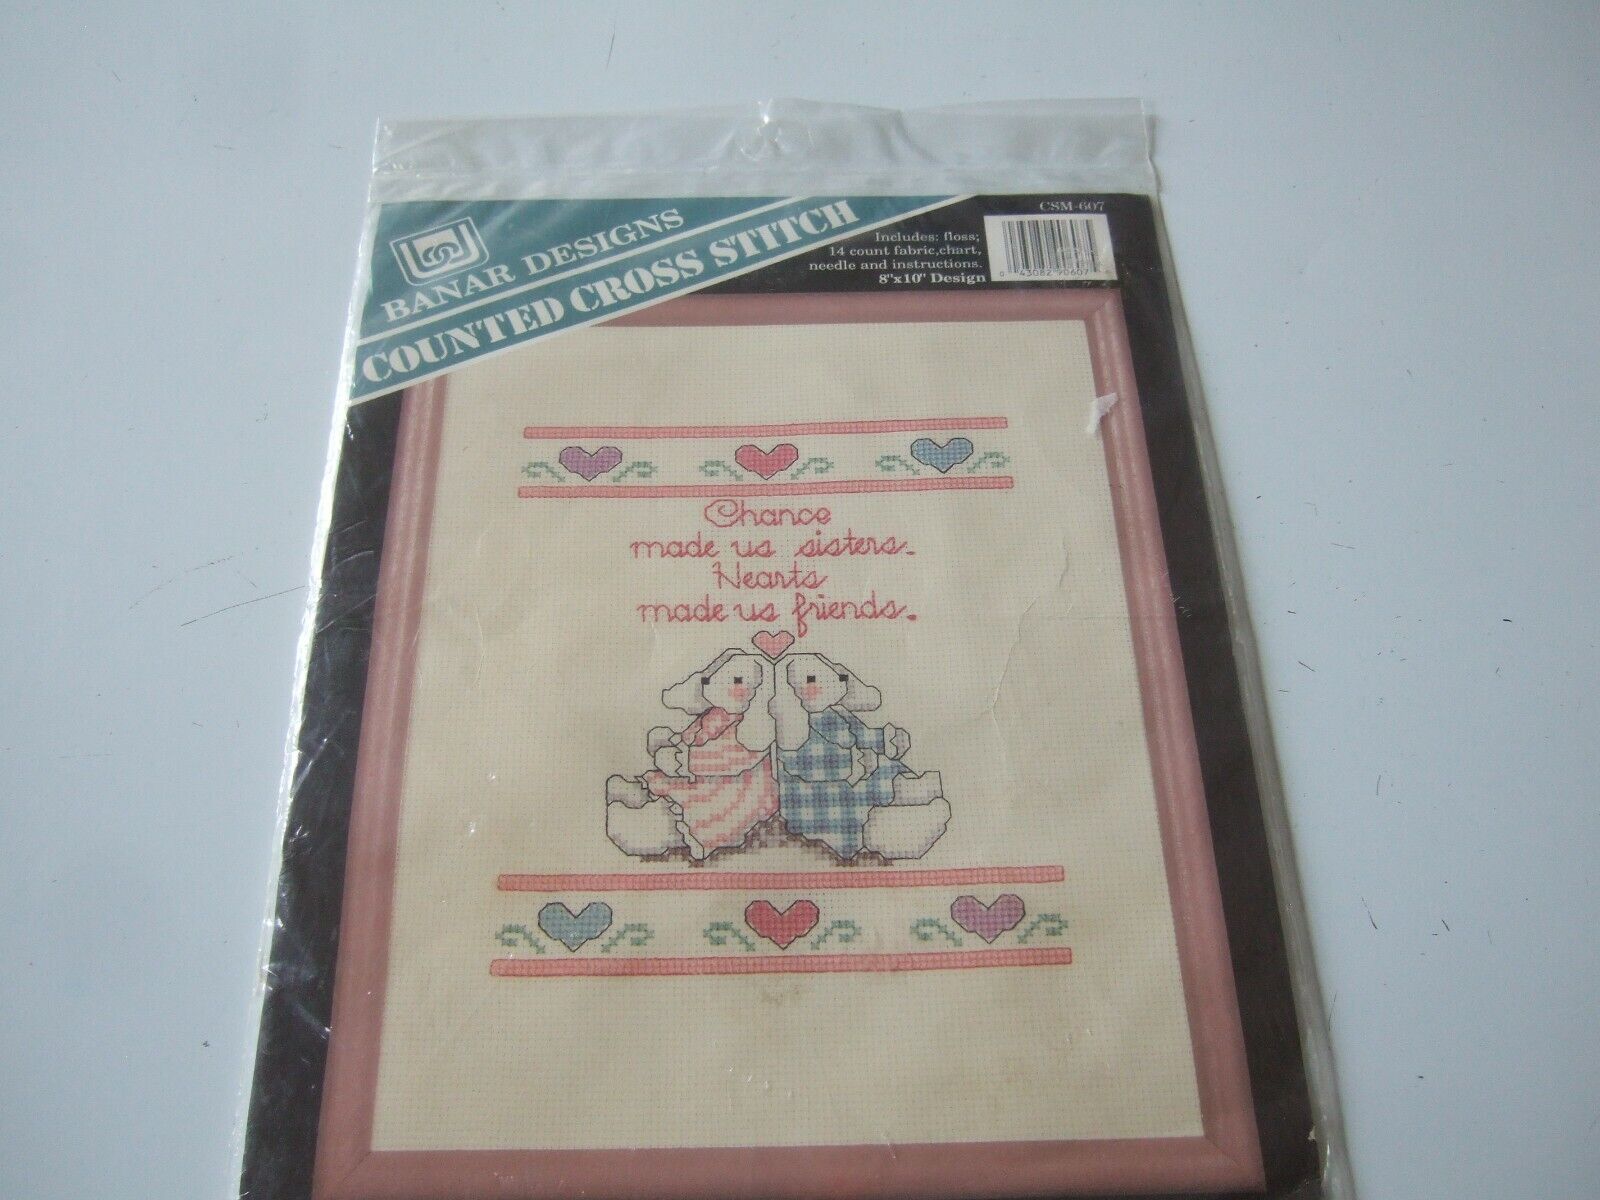 NEW SEALED BANAR DESIGNS COUNTED CROSS STITCH KIT   SISTERS - RABBITS  #CSM-607